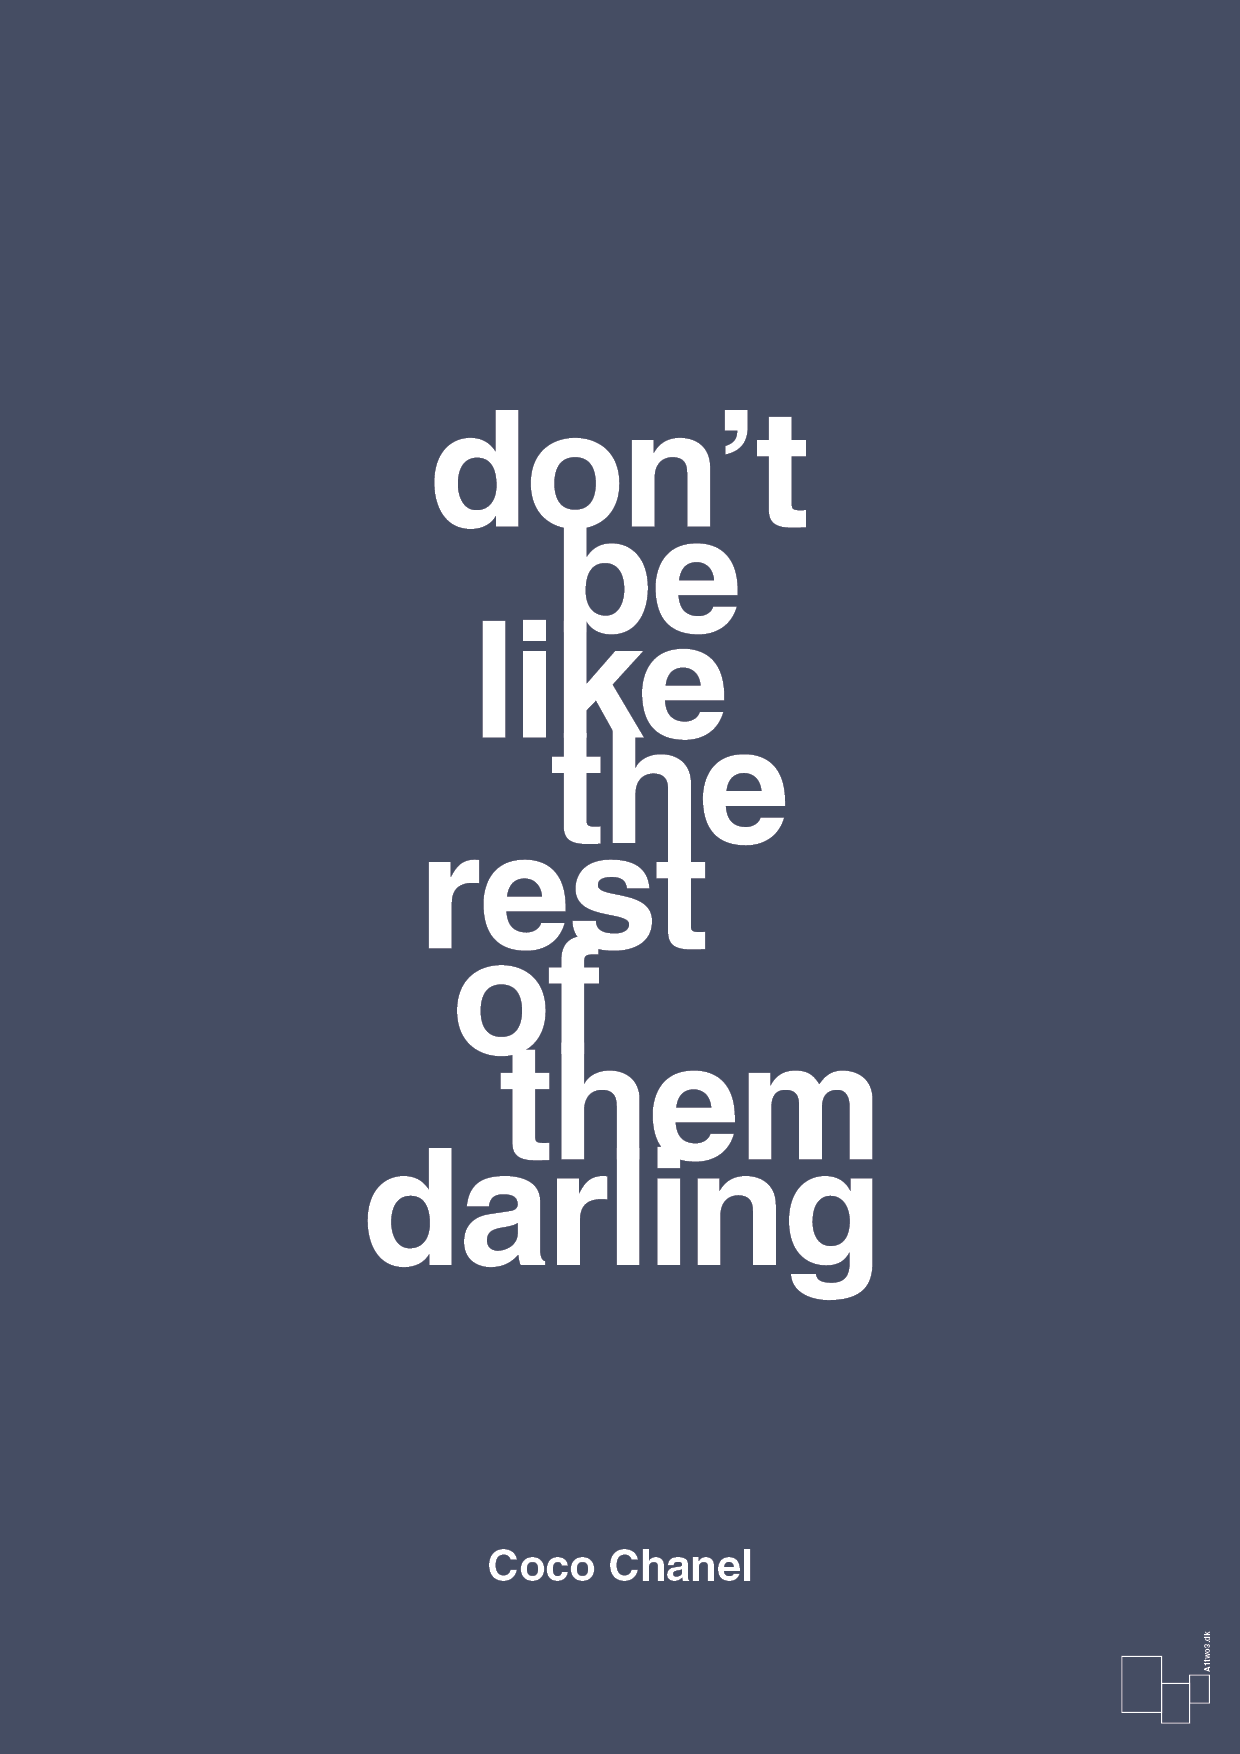 don’t be like the rest of them darling - Plakat med Citater i Petrol